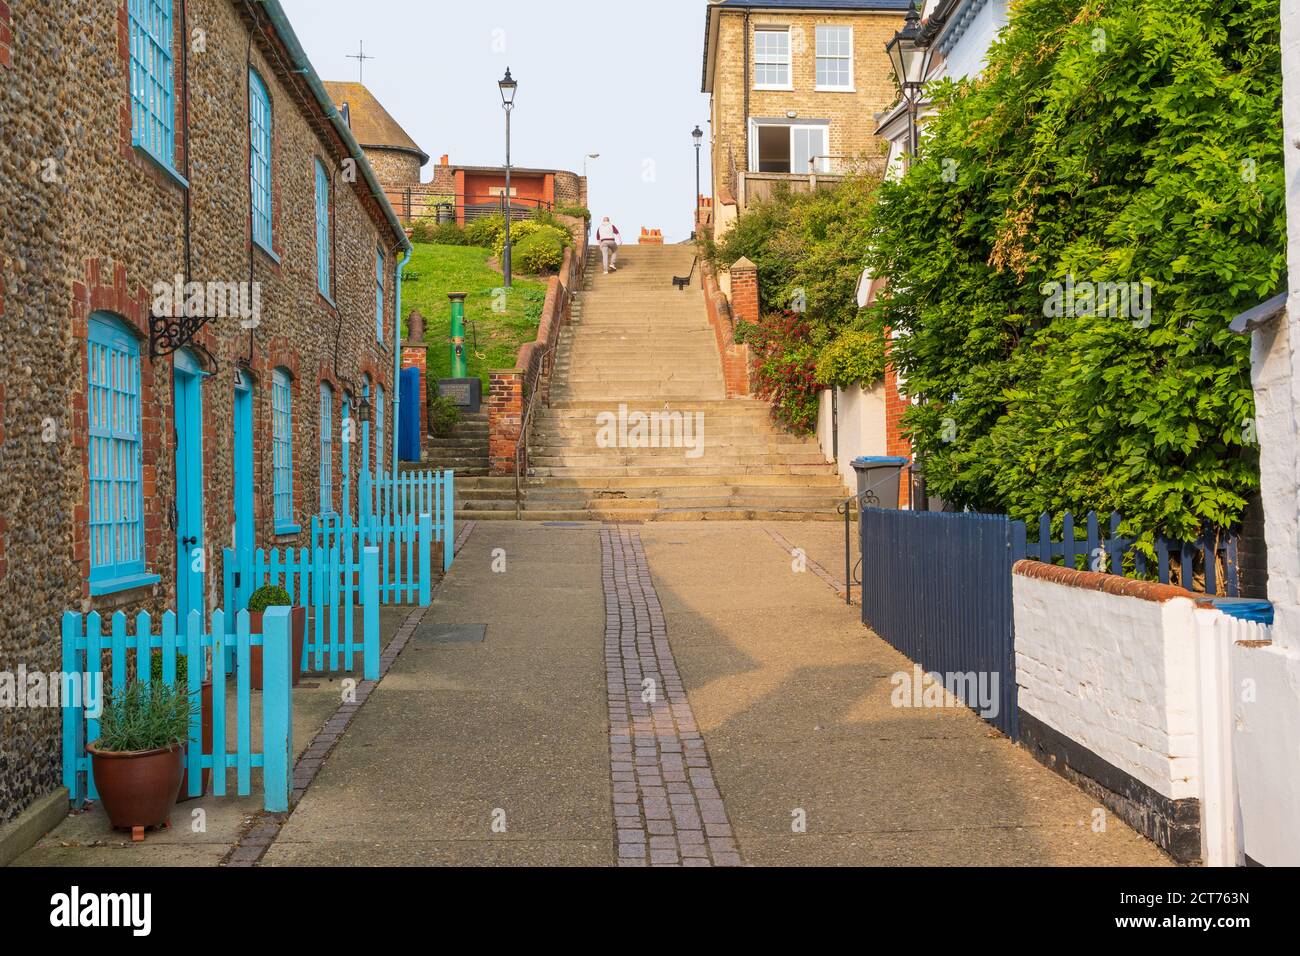 Aldeburgh, Suffolk. UK. 2020. View of the Town Steps from the High Street in Aldeburgh. Stock Photo